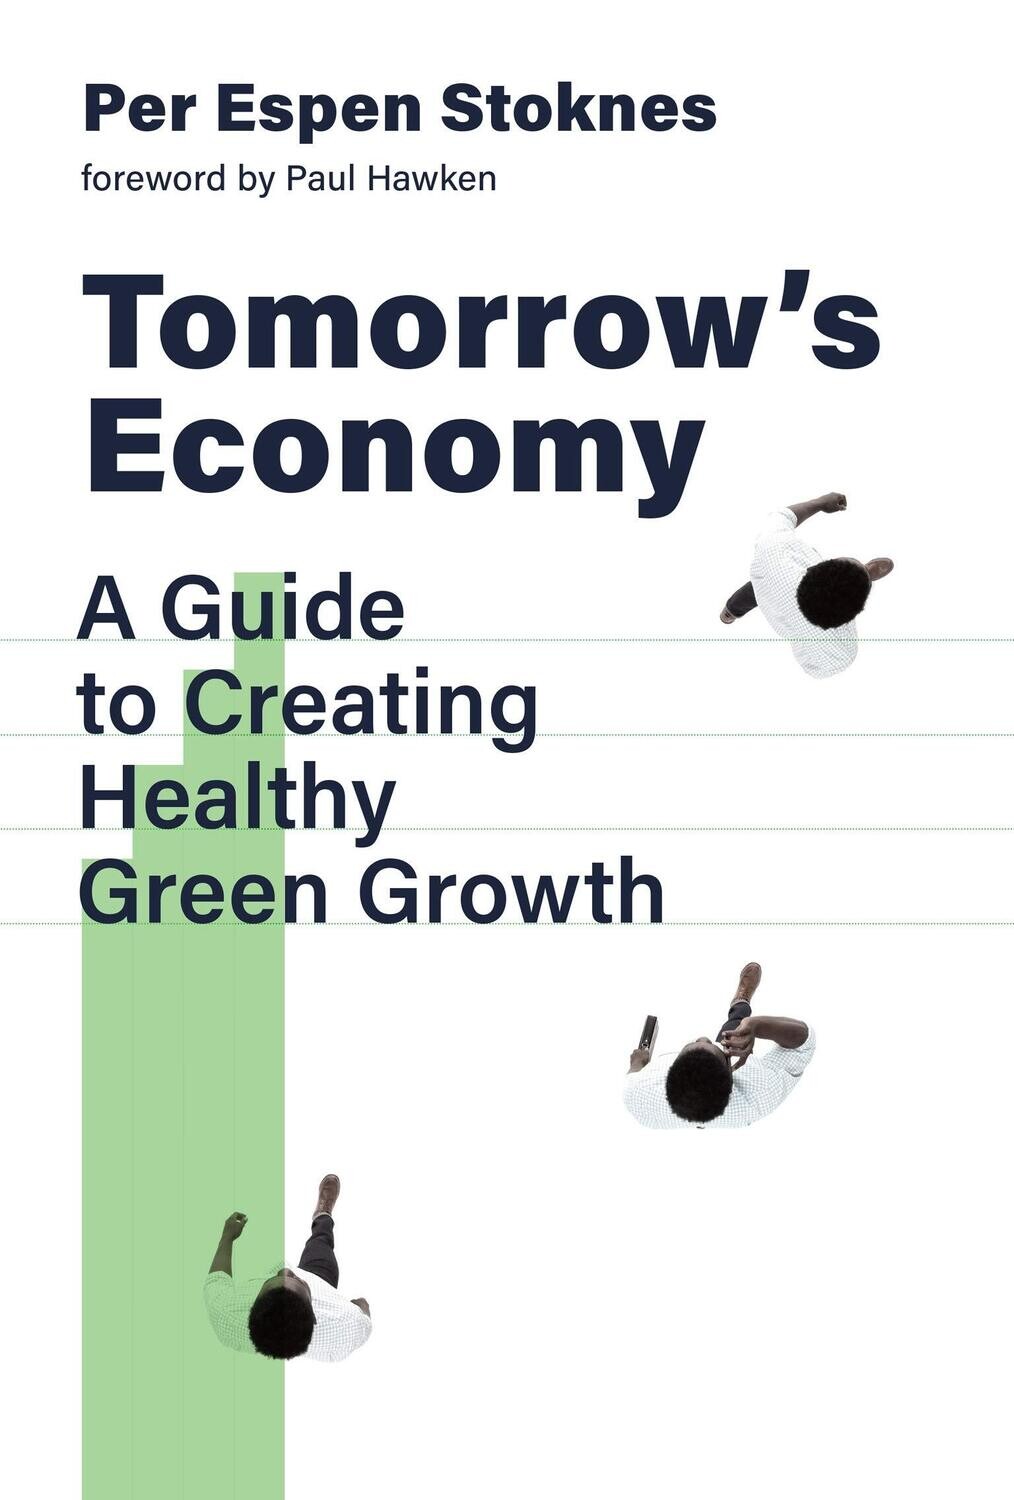 Book - Tomorrow's Economy. A Guide to Creating Healthy Green Growth